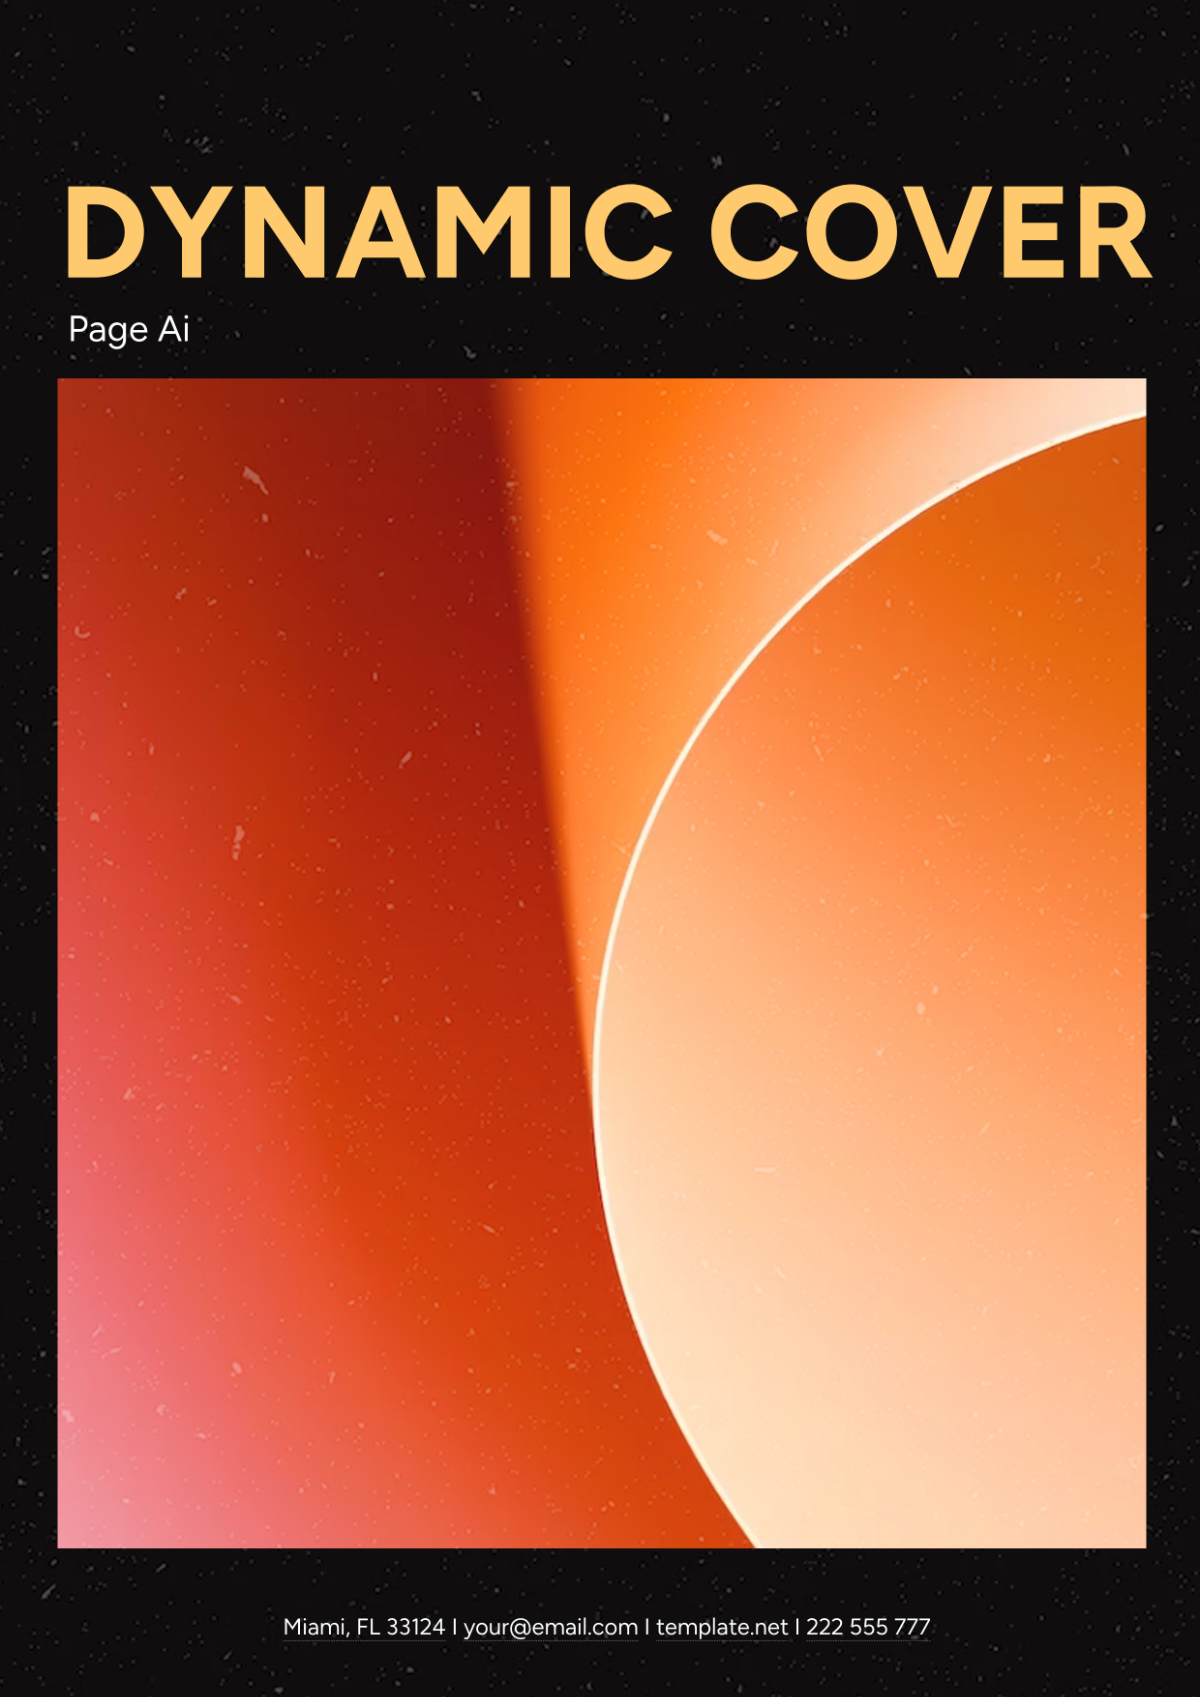 Dynamic Cover Page AI Template